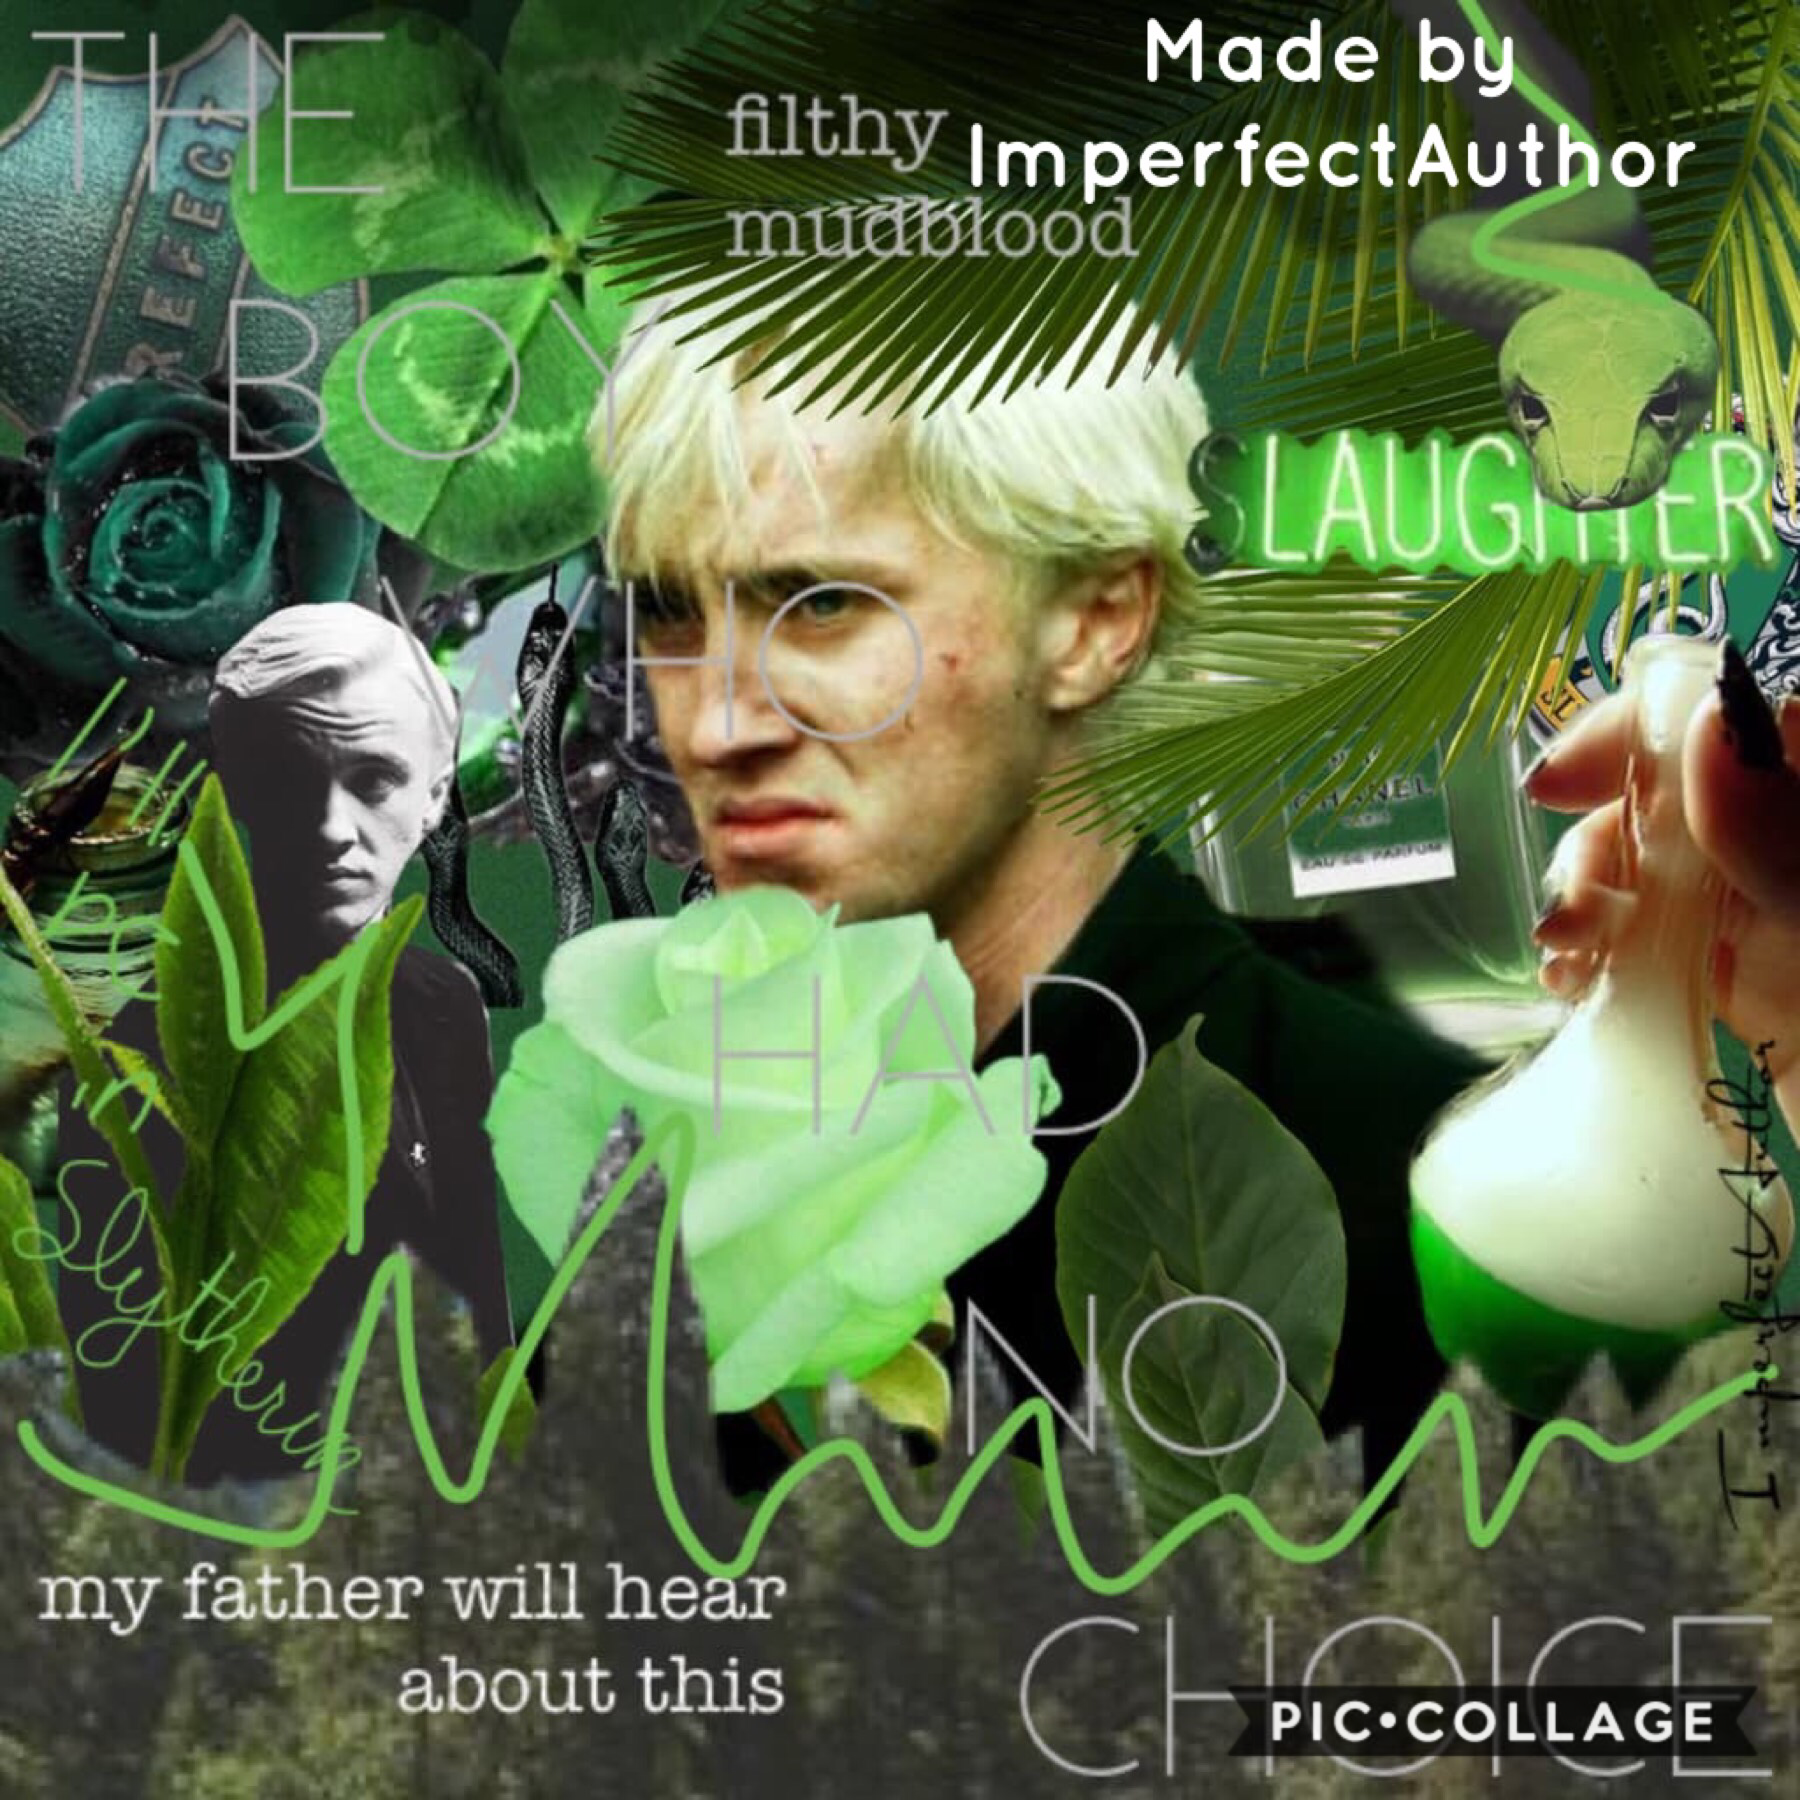 🐍💚Tap💚🐍


This collage is Soooo good!  ImperfectAuthor definitely put a lot of effort into this!  She only has 165 followers, so please help her get some more! 😁